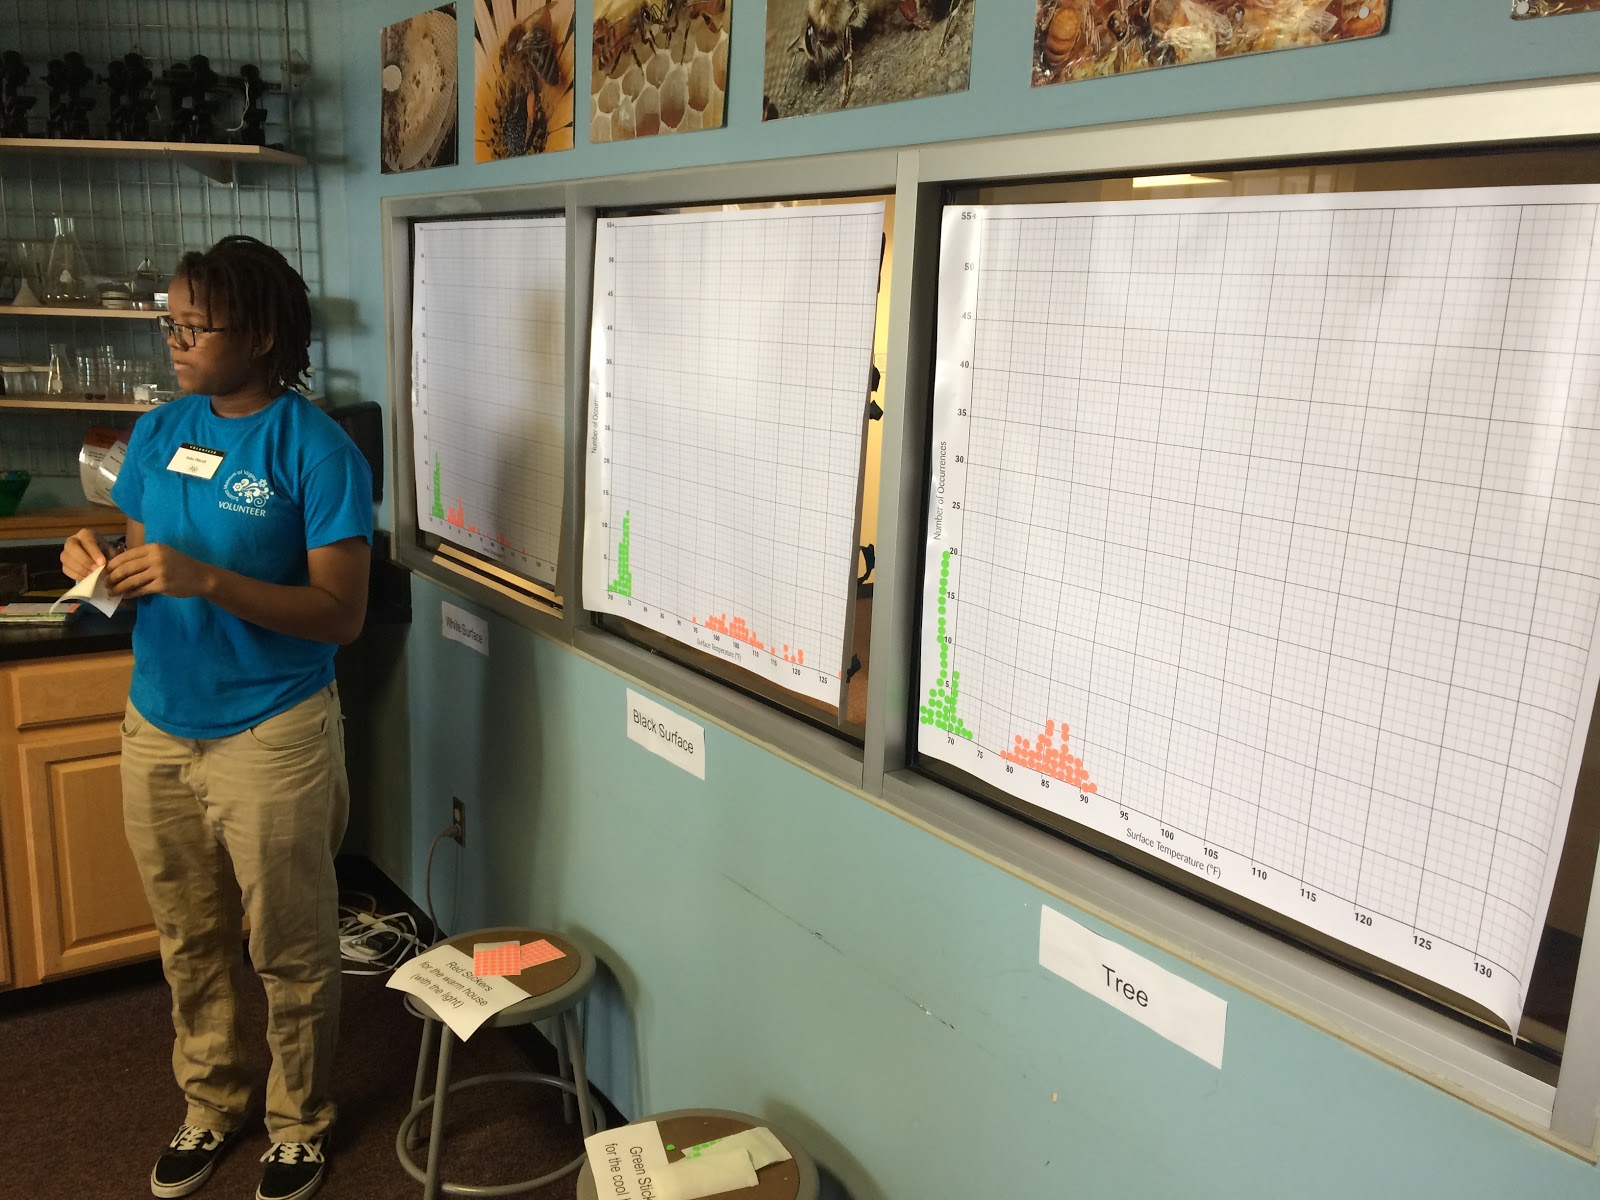 At the Science Museum of Virginia's 2018 PrepareAThon, volunteers guide guests as they collect and graph temperature readings of surfaces under a heat lamp and at room temperature. This activity helped visitors identify the underlying drivers of urban heat islands in Richmond and other US cities.